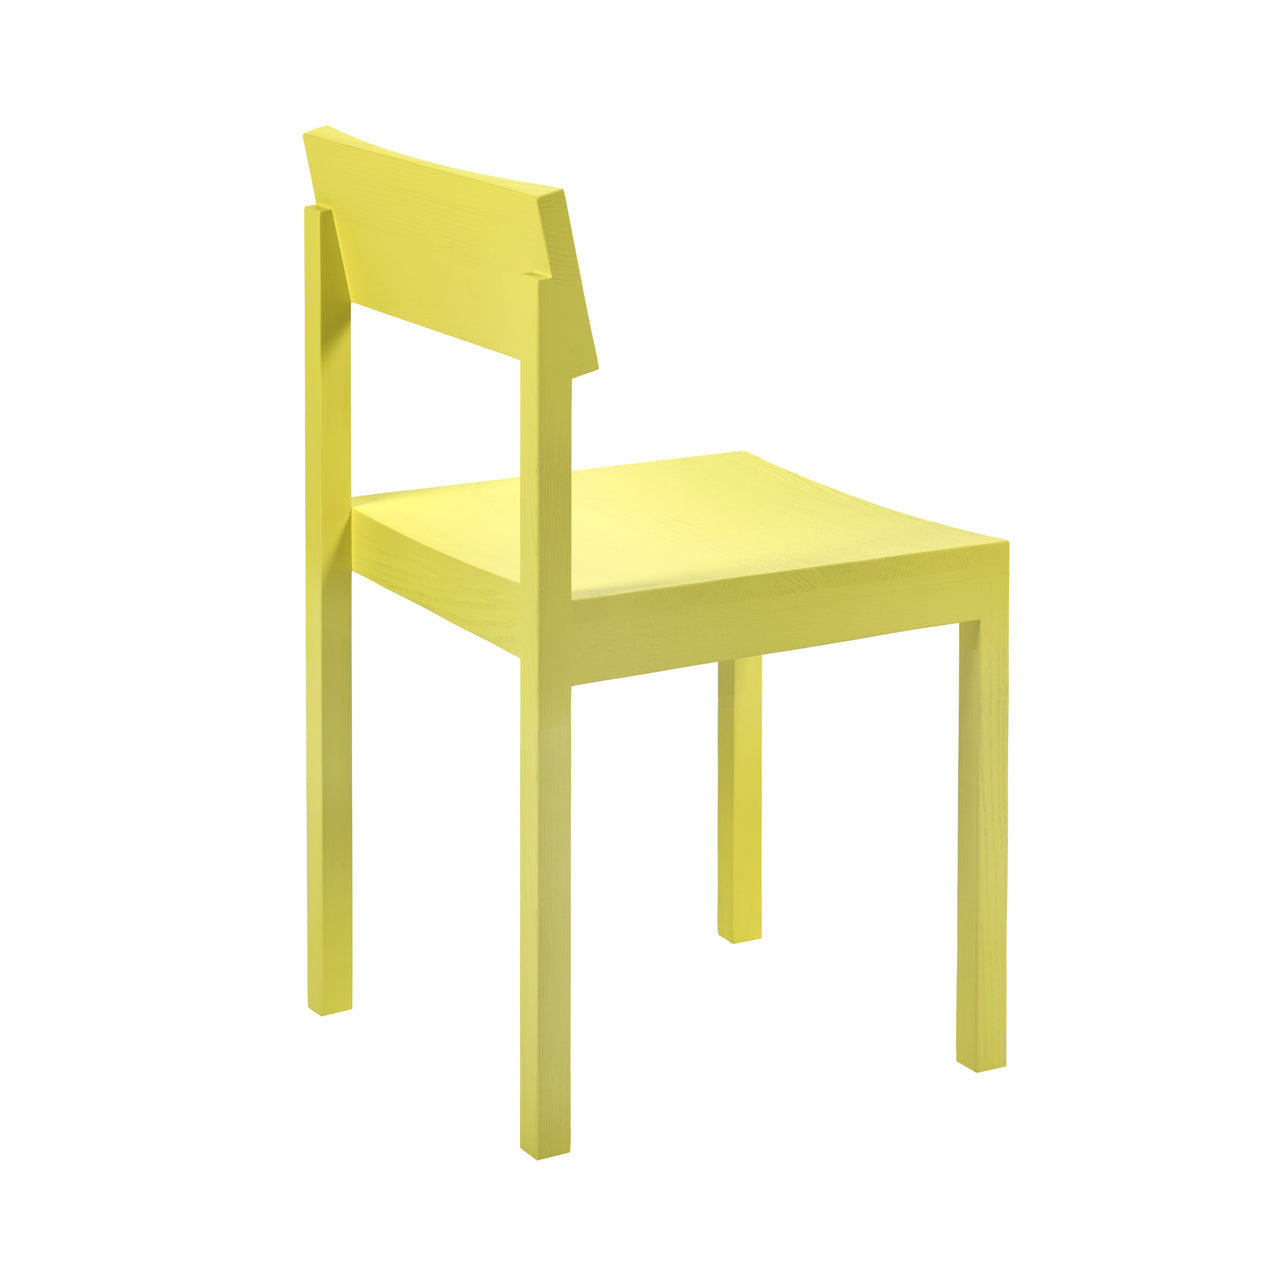 Silent Chair: Without Arm + Sun